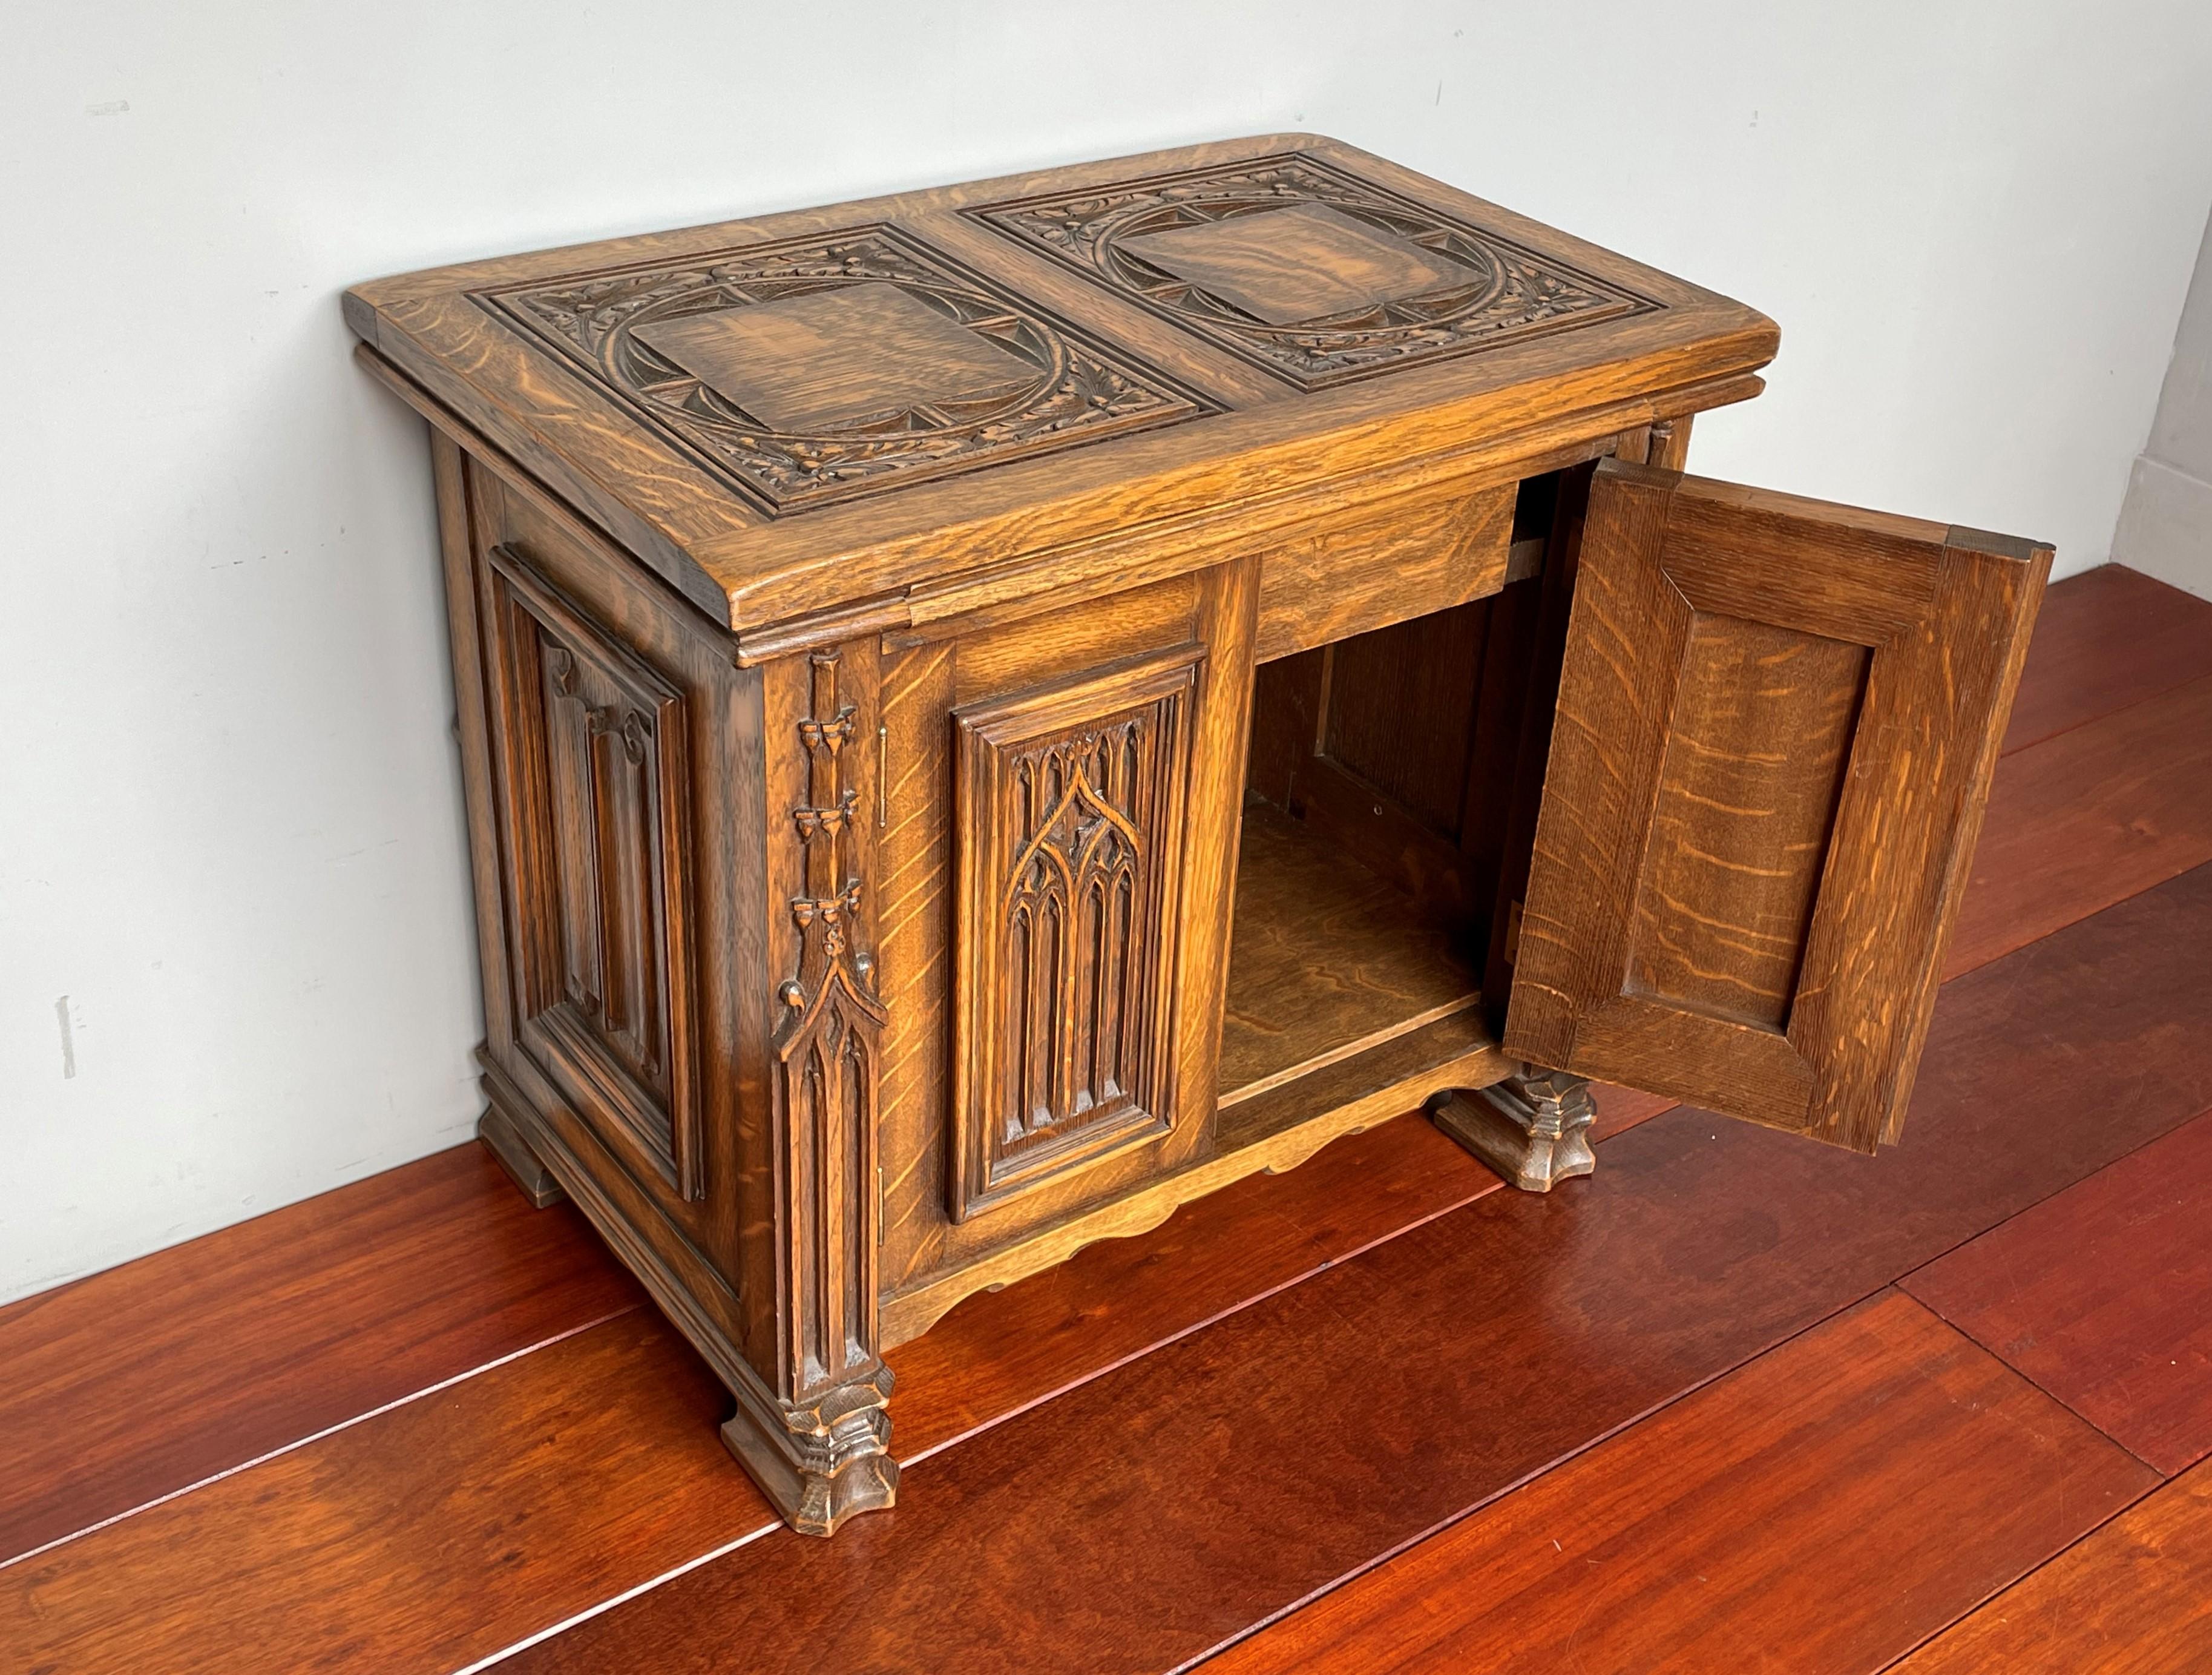 Stunning little, multi purpose Gothic cabinet from a monastery.

This here Gothic cabinet is one of the smallest yet most stylish we ever had the pleasure of offering. It is entirely hand-crafted and hand carved out of solid tiger oak and it has a